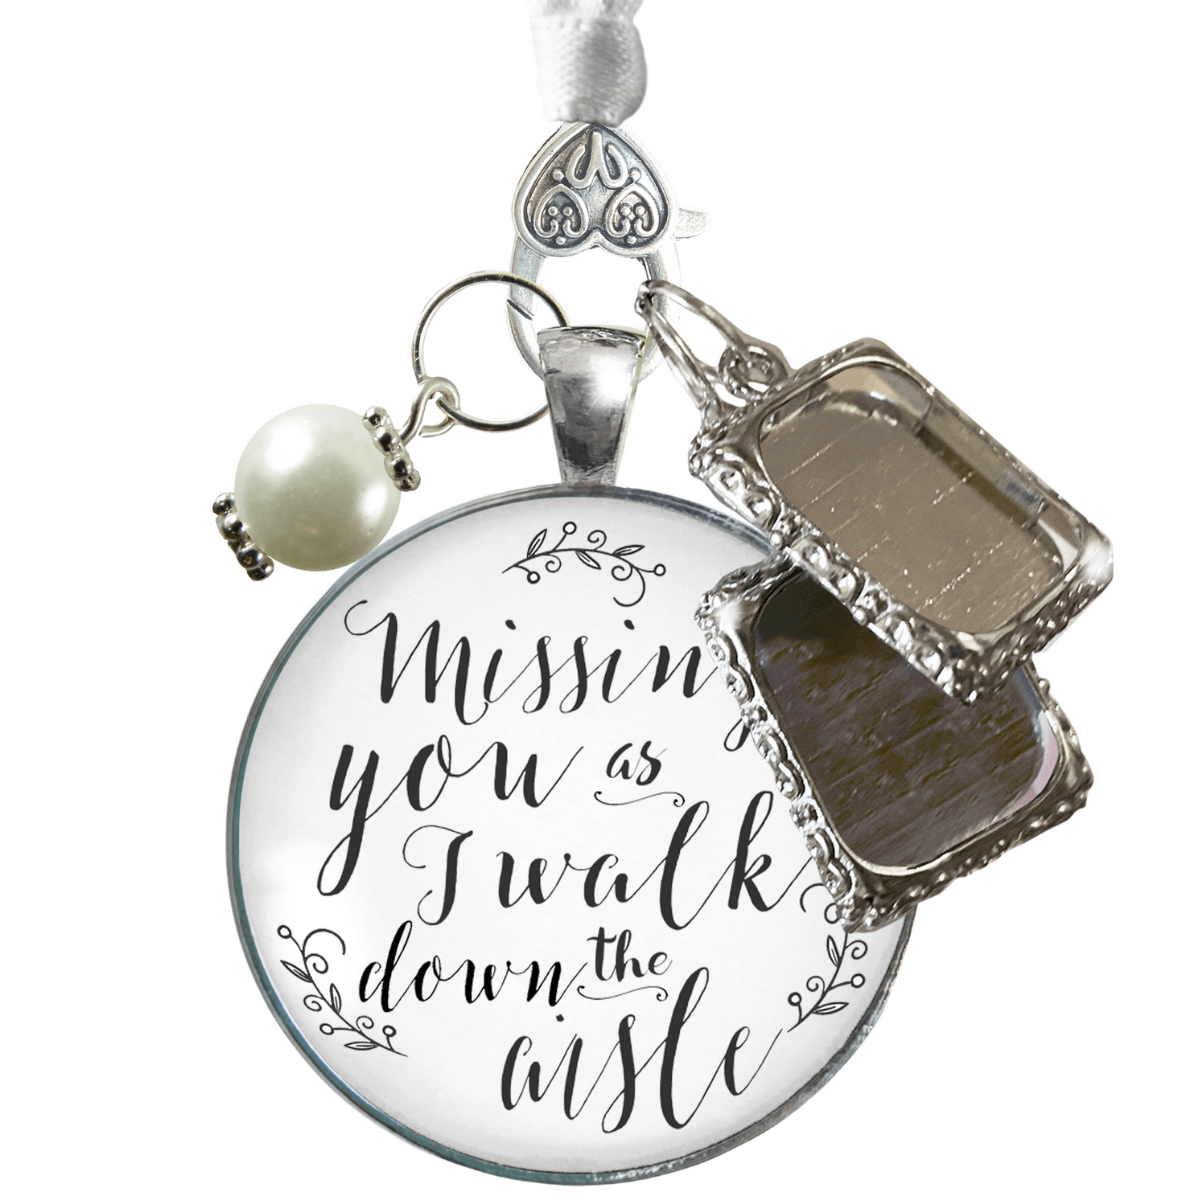  Wedding Bouquet Charm Memorial Loved Beyond Words Missed Every  Moment Honor Anyone 1 Photo Frame Wedding Remembrance Antique Silvertone  White Glass Pendant White Bead for Bride DIY Template : Handmade Products